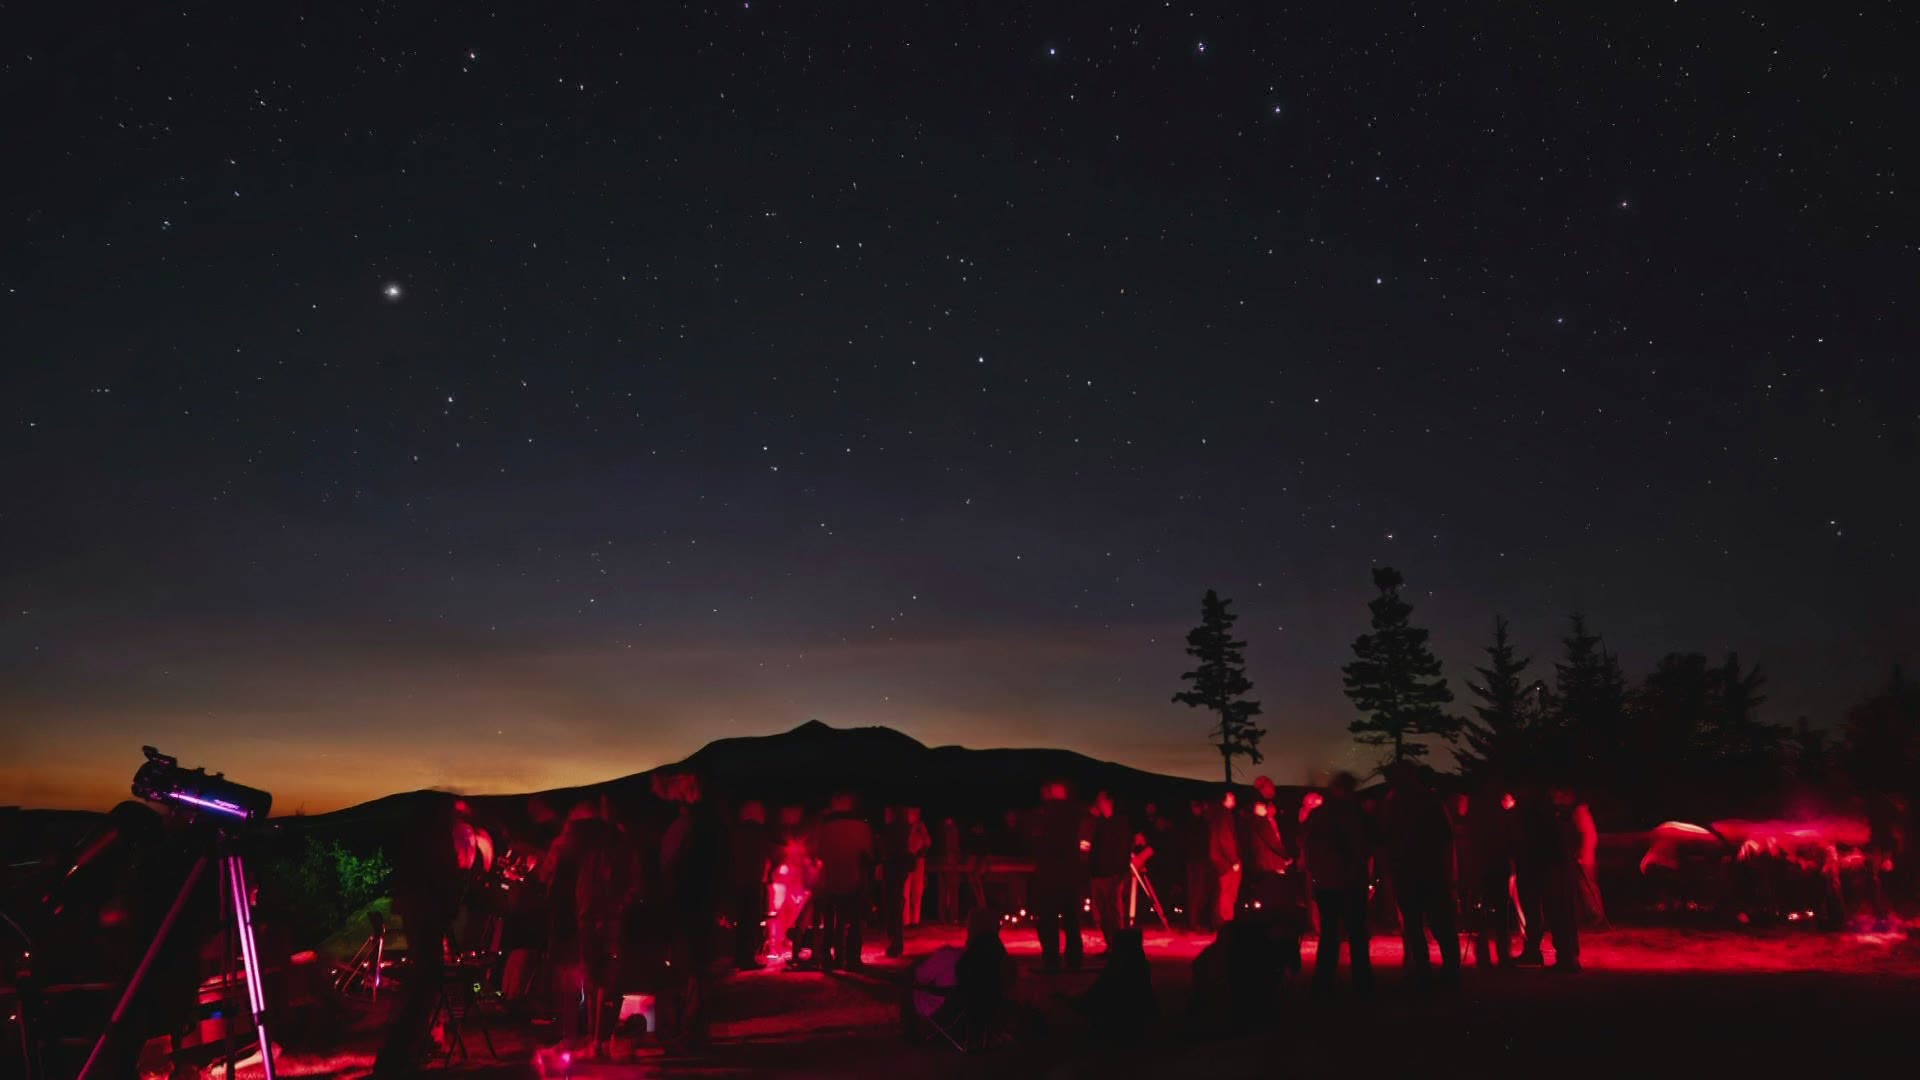 You’ll find superb stargazing in one of the darkest places in the world